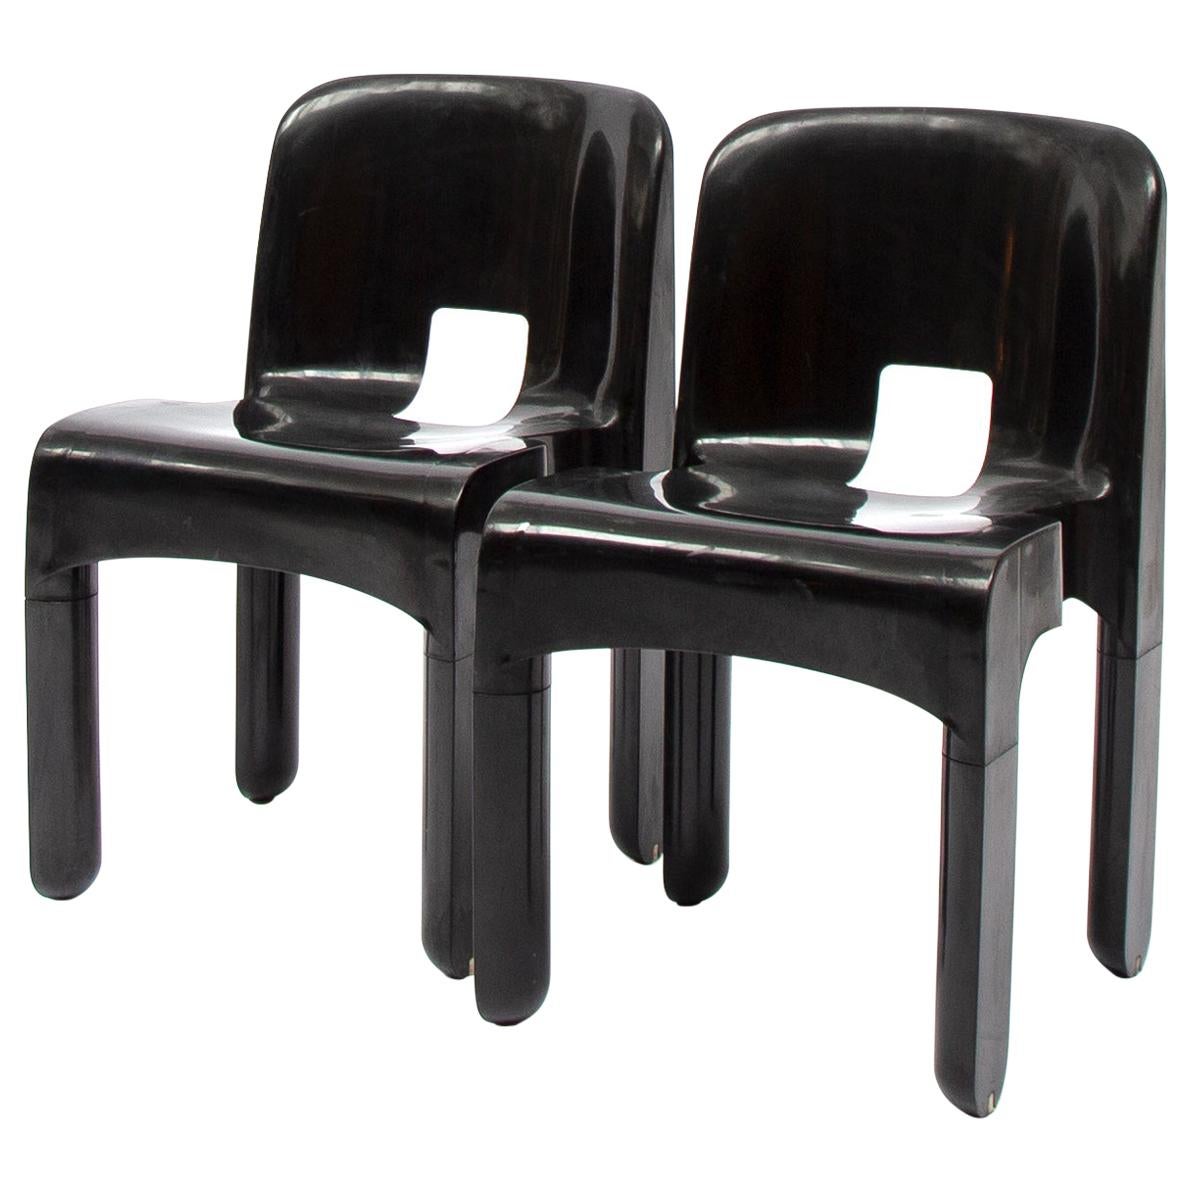 No.4867 Universale Black Plastic Chairs By Joe Colombo For Kartell, 1967